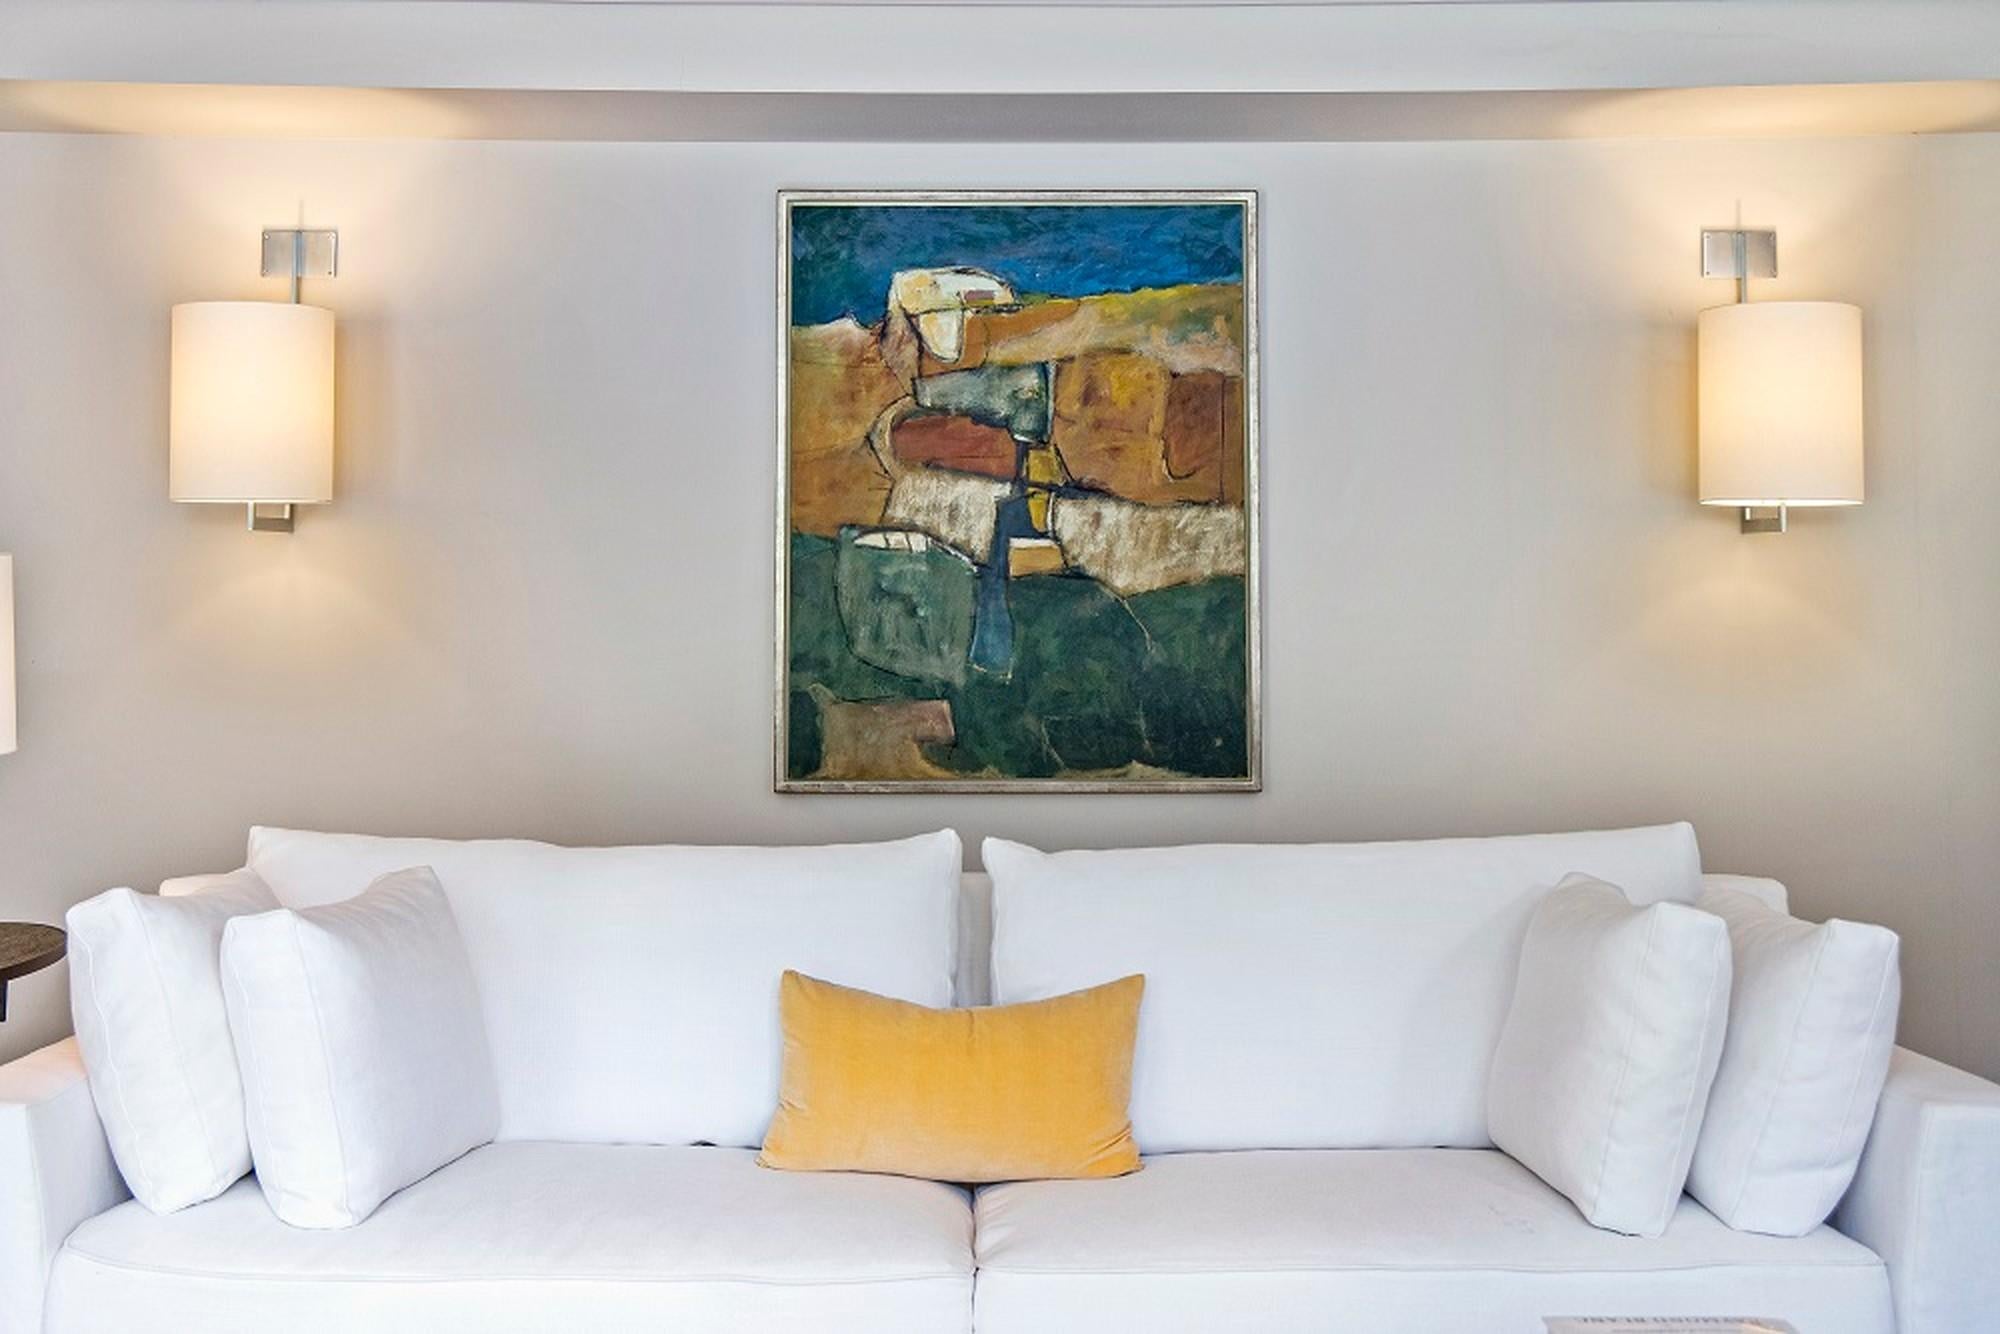 Puglia II is an abstract oil painting with an aerial viewpoint by Artist & Musician John Illsley. It focuses on the landscape & coastal lines of the Southern Italian region which forms the heel of Italy’s “boot